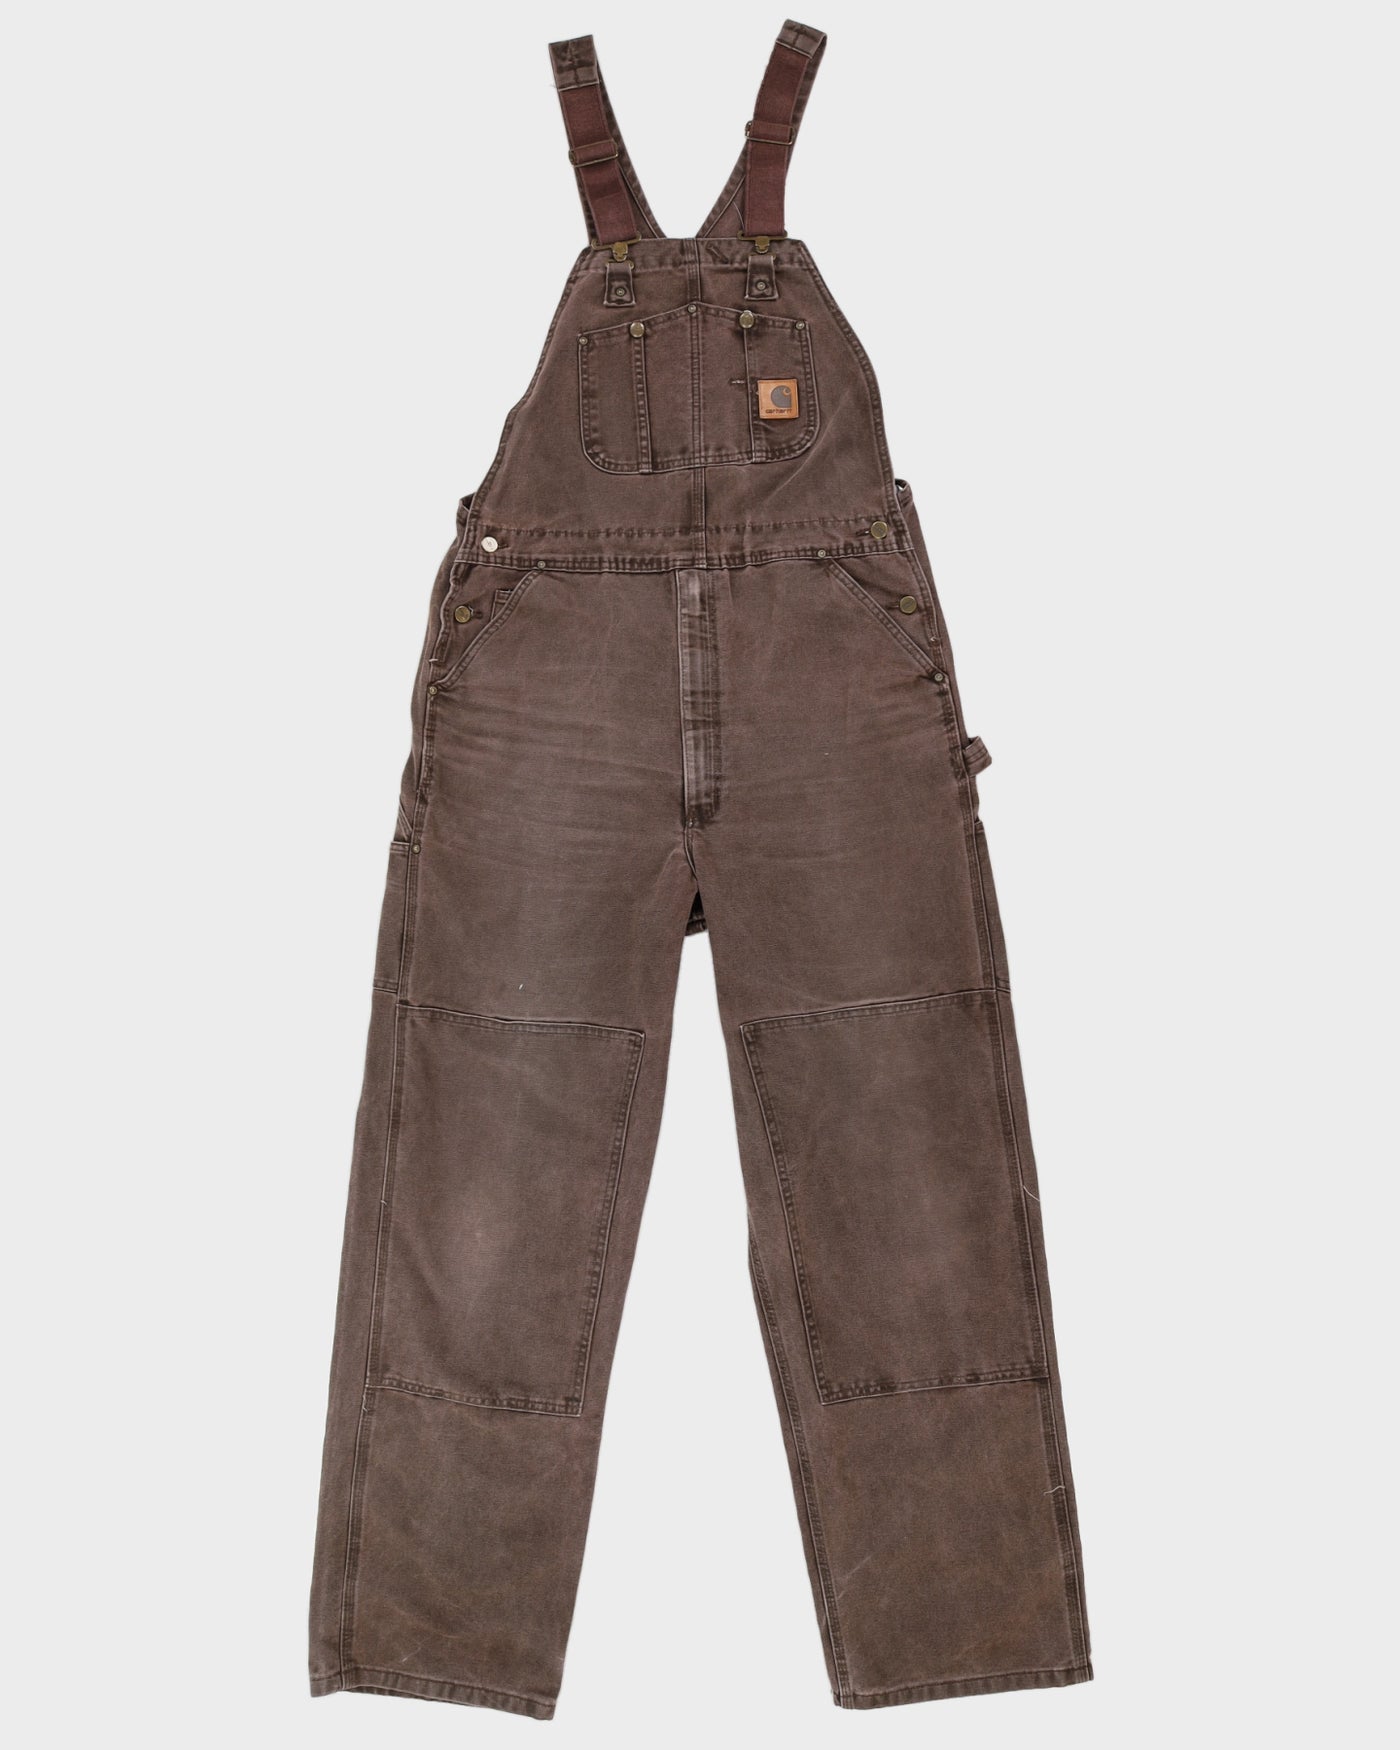 00s Y2K Carhartt Brown Dungarees - W38 L32